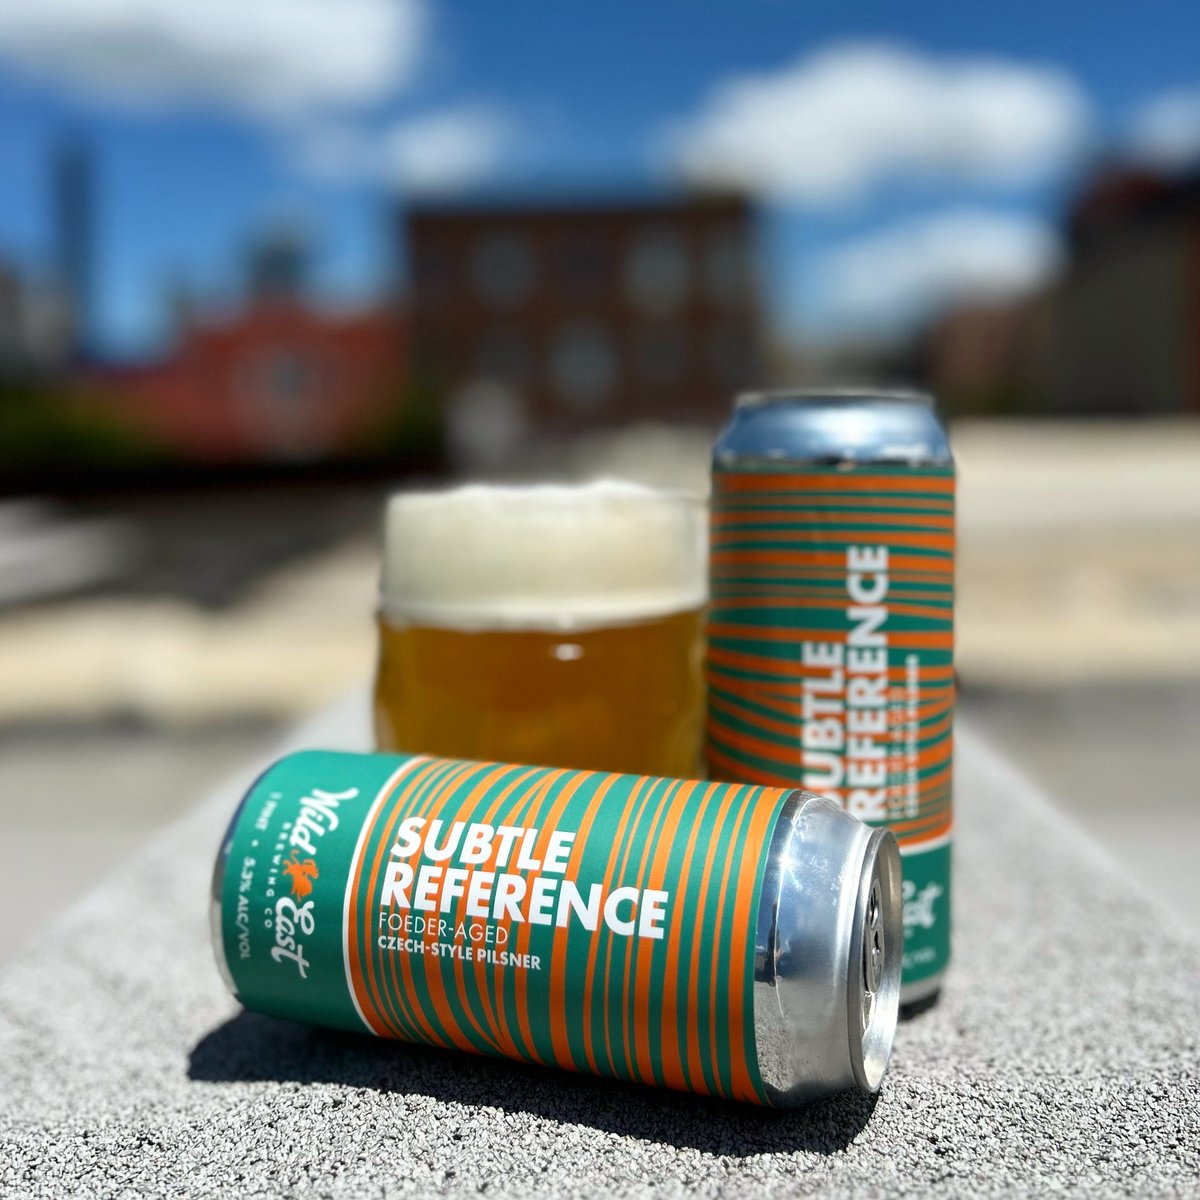 Our debut foeder-aged Czech-style pils (a collaboration with @ThreesBrewing) releases this Friday. Or stop by Threes in Gowanus tonight for pre-release drafts at their #SummerofPils event. We’ll be there too!